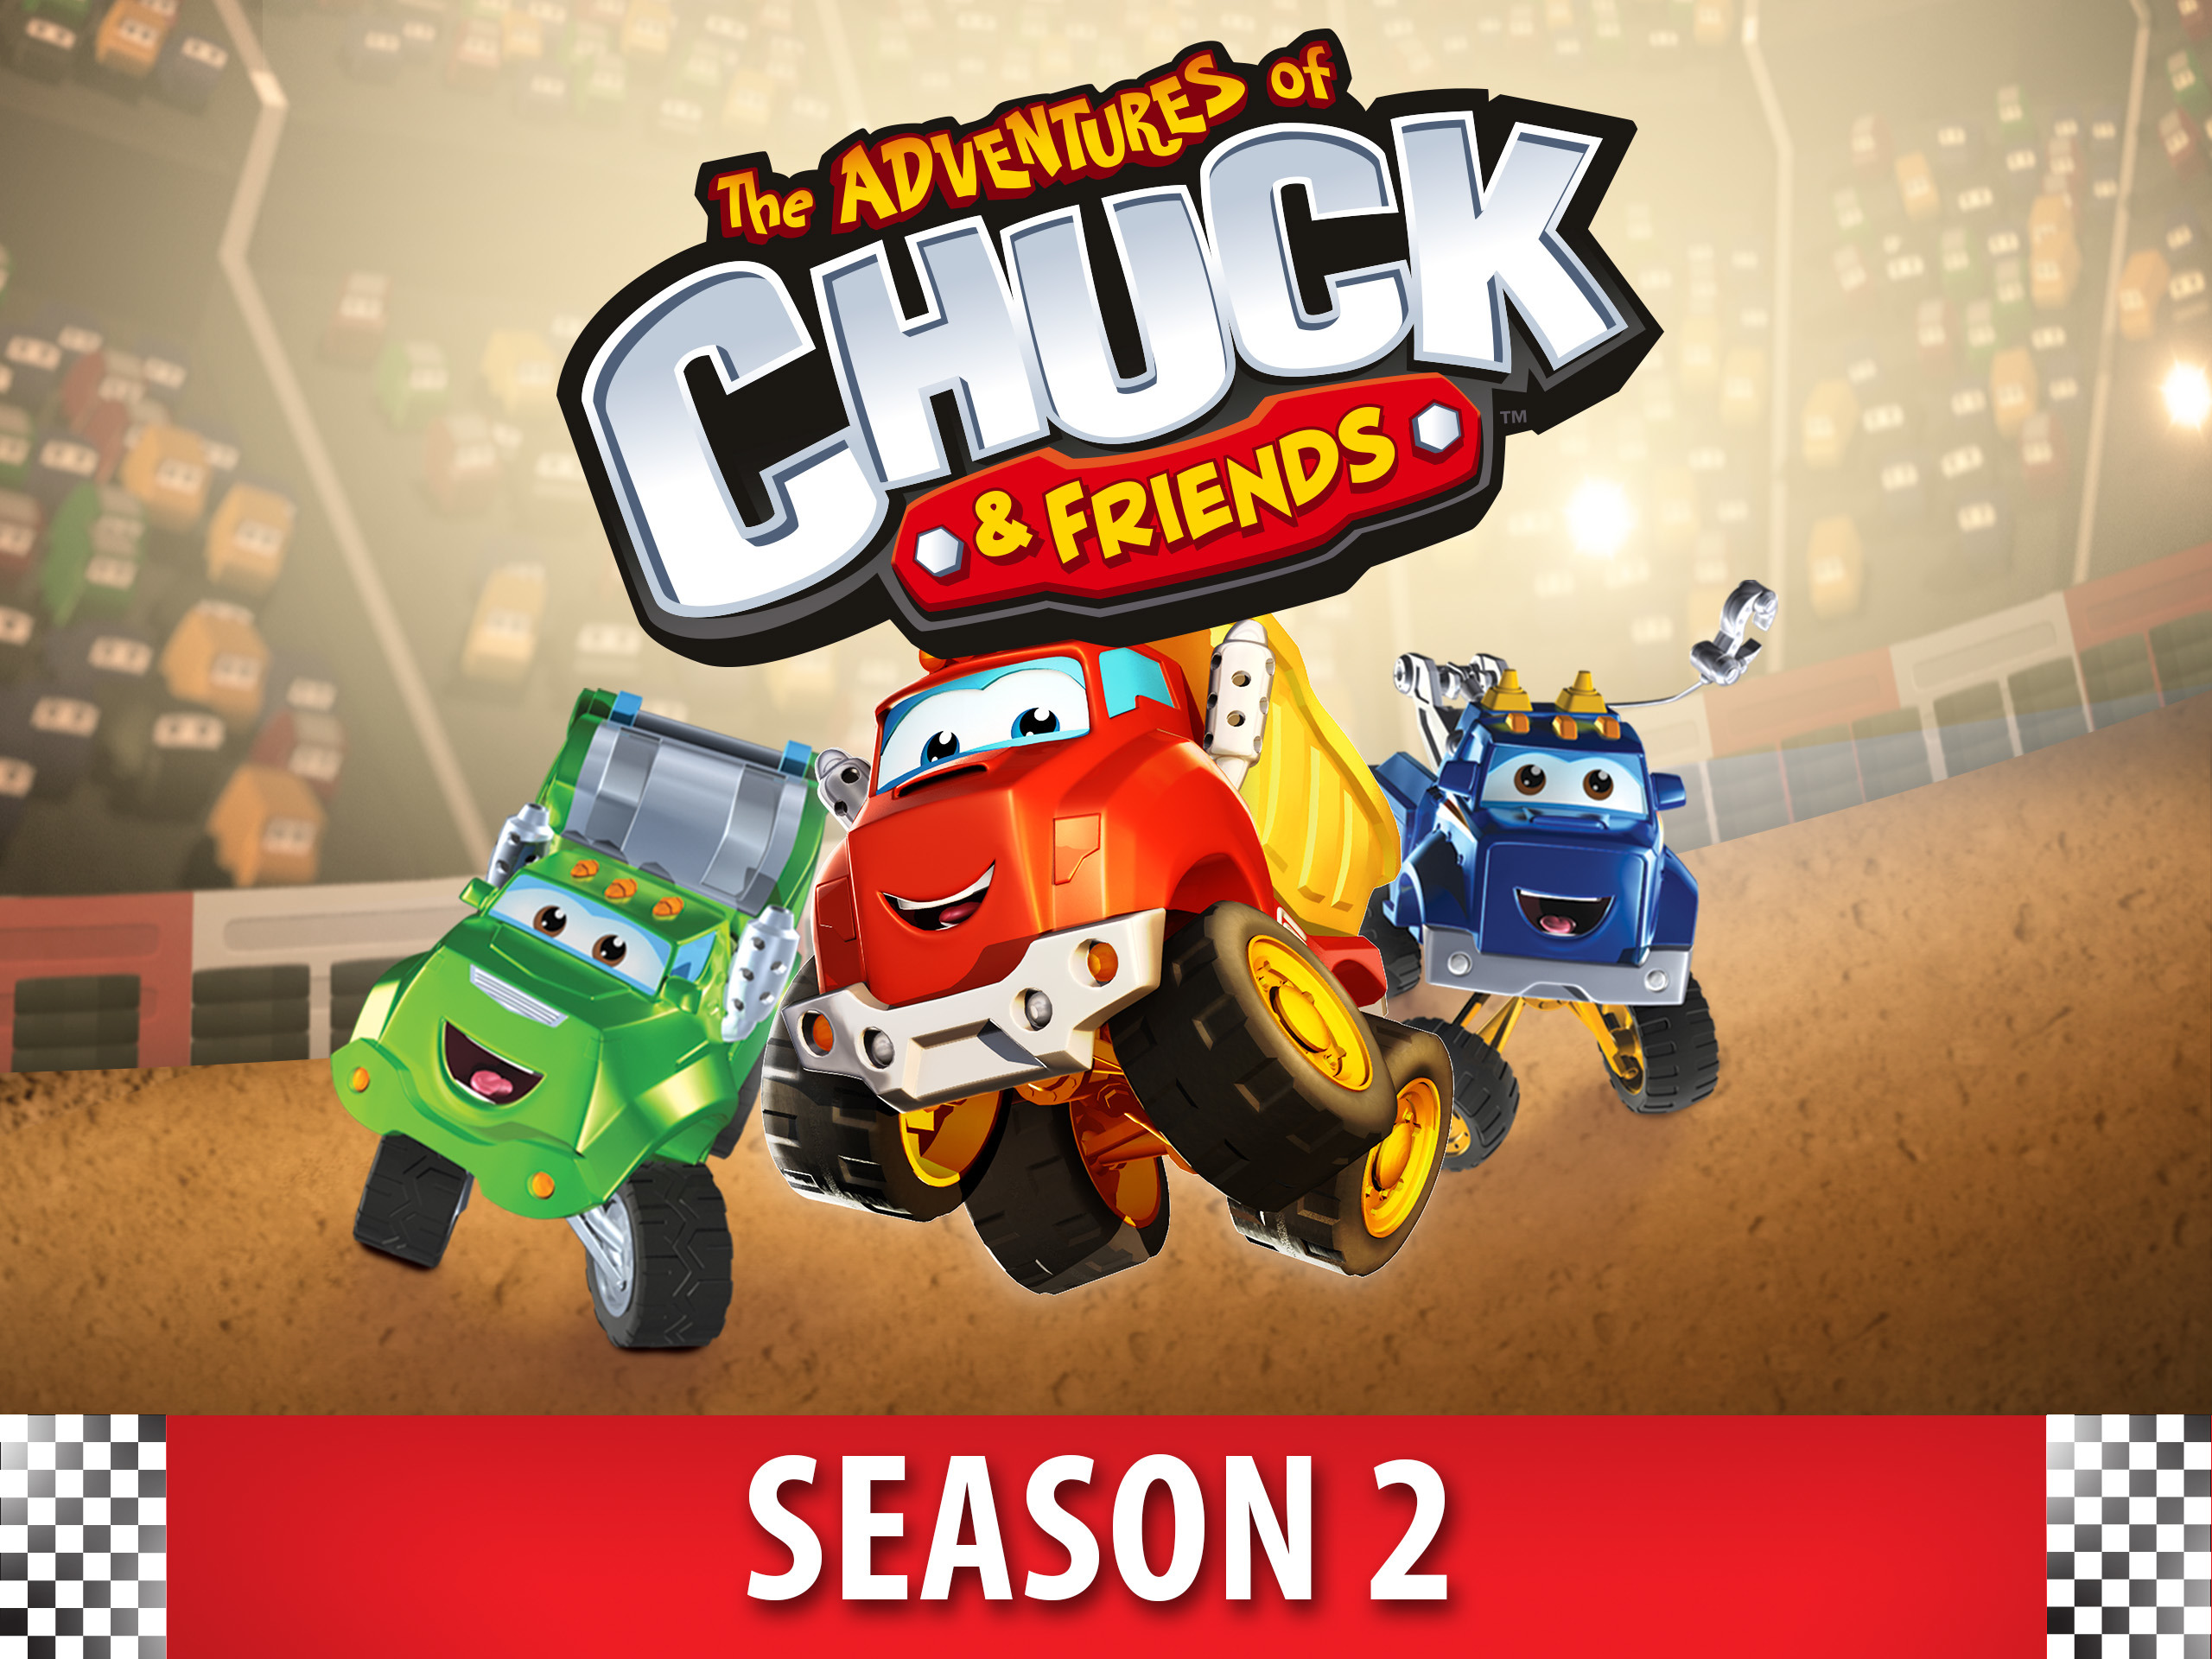 Prime Video The Adventures Of Chuck Friends